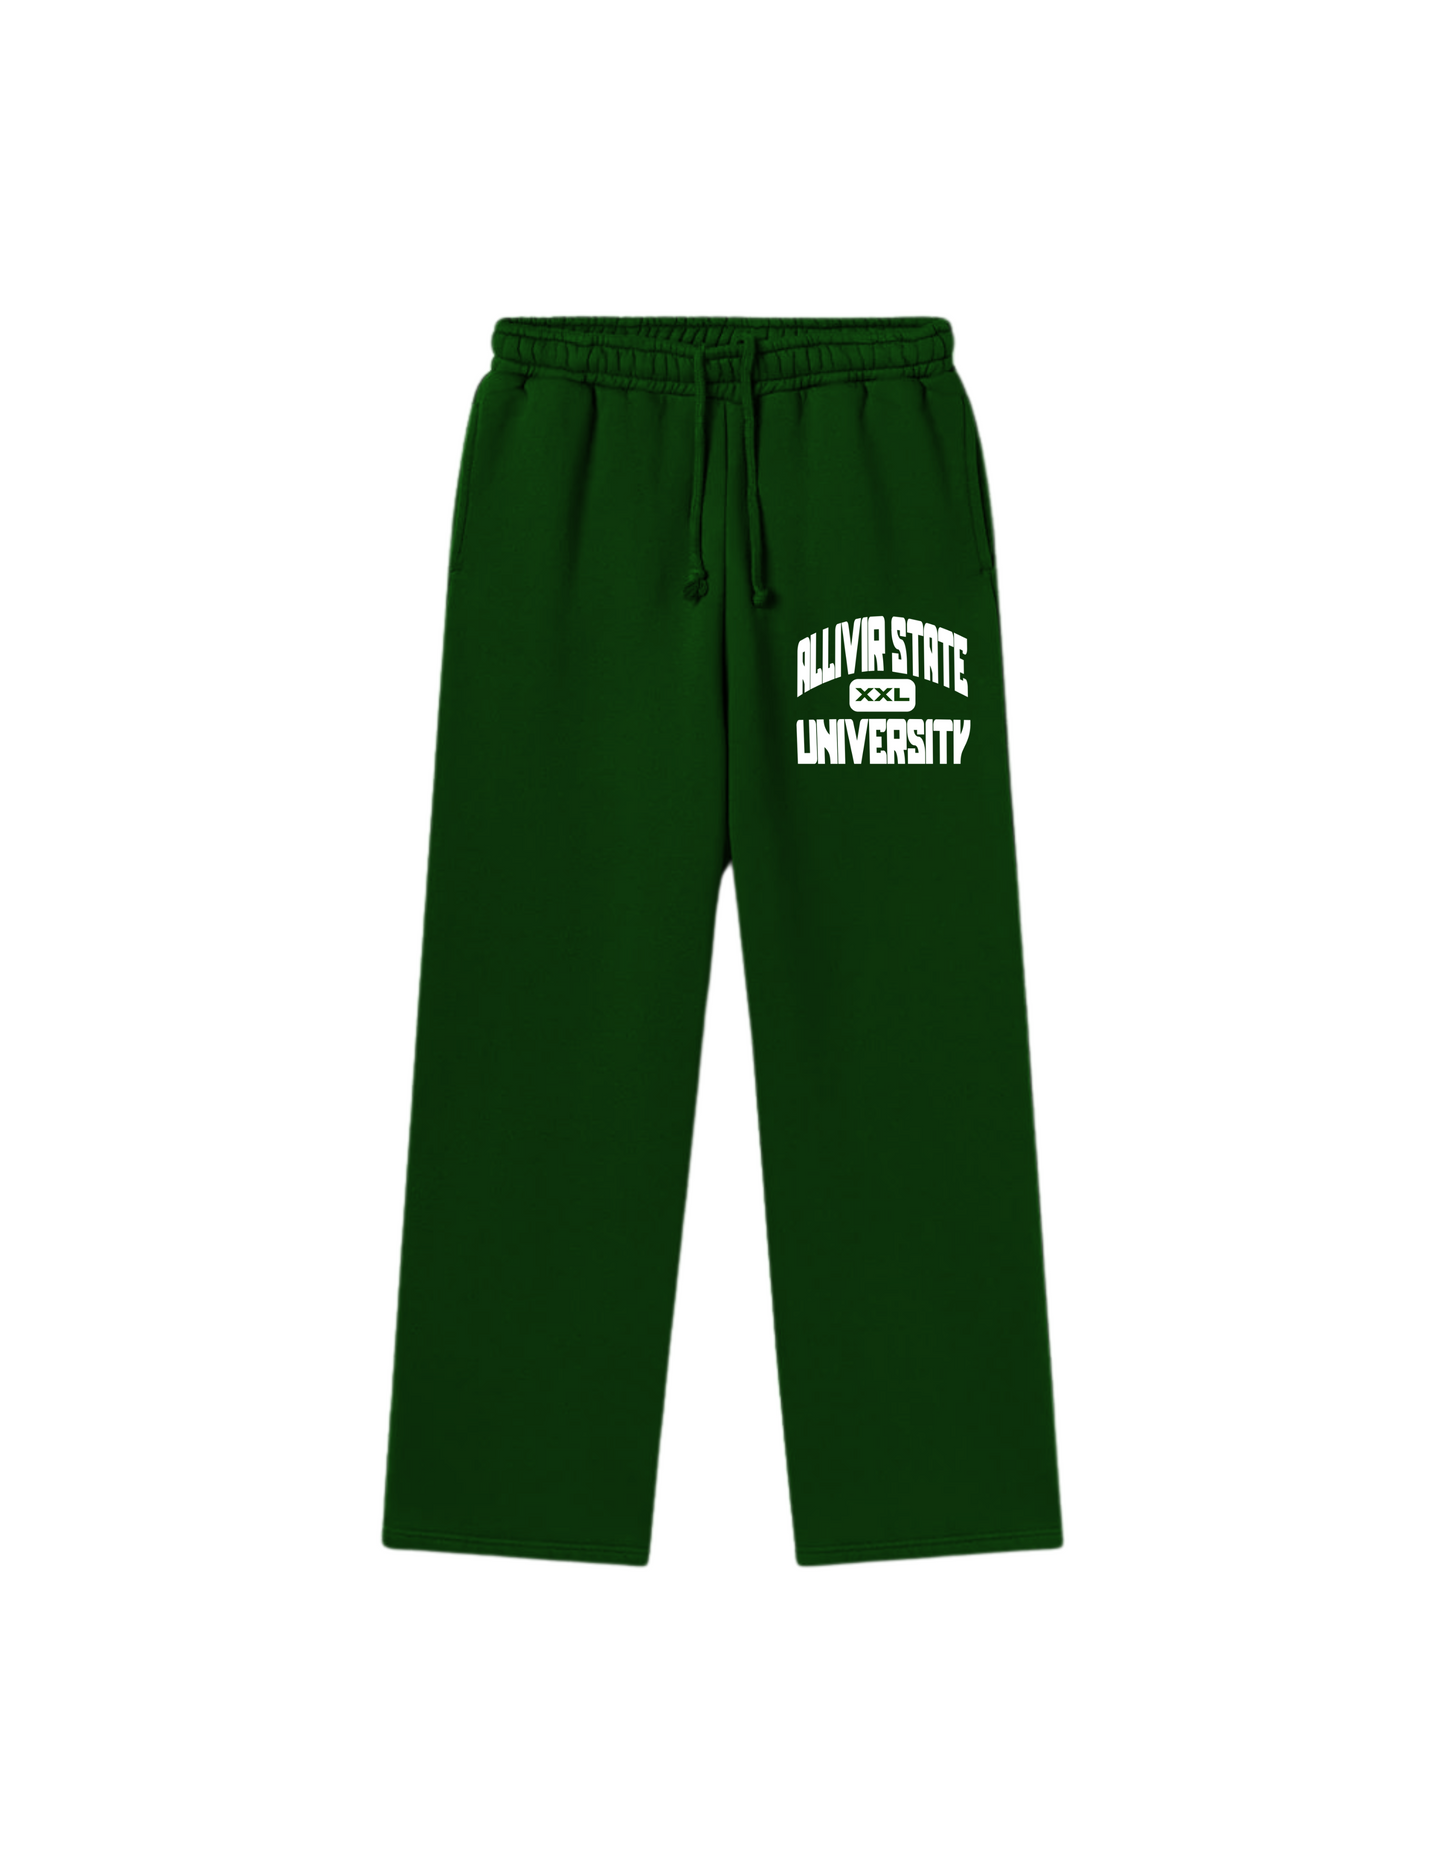 Allivir State University Sweatpant in Forest Green